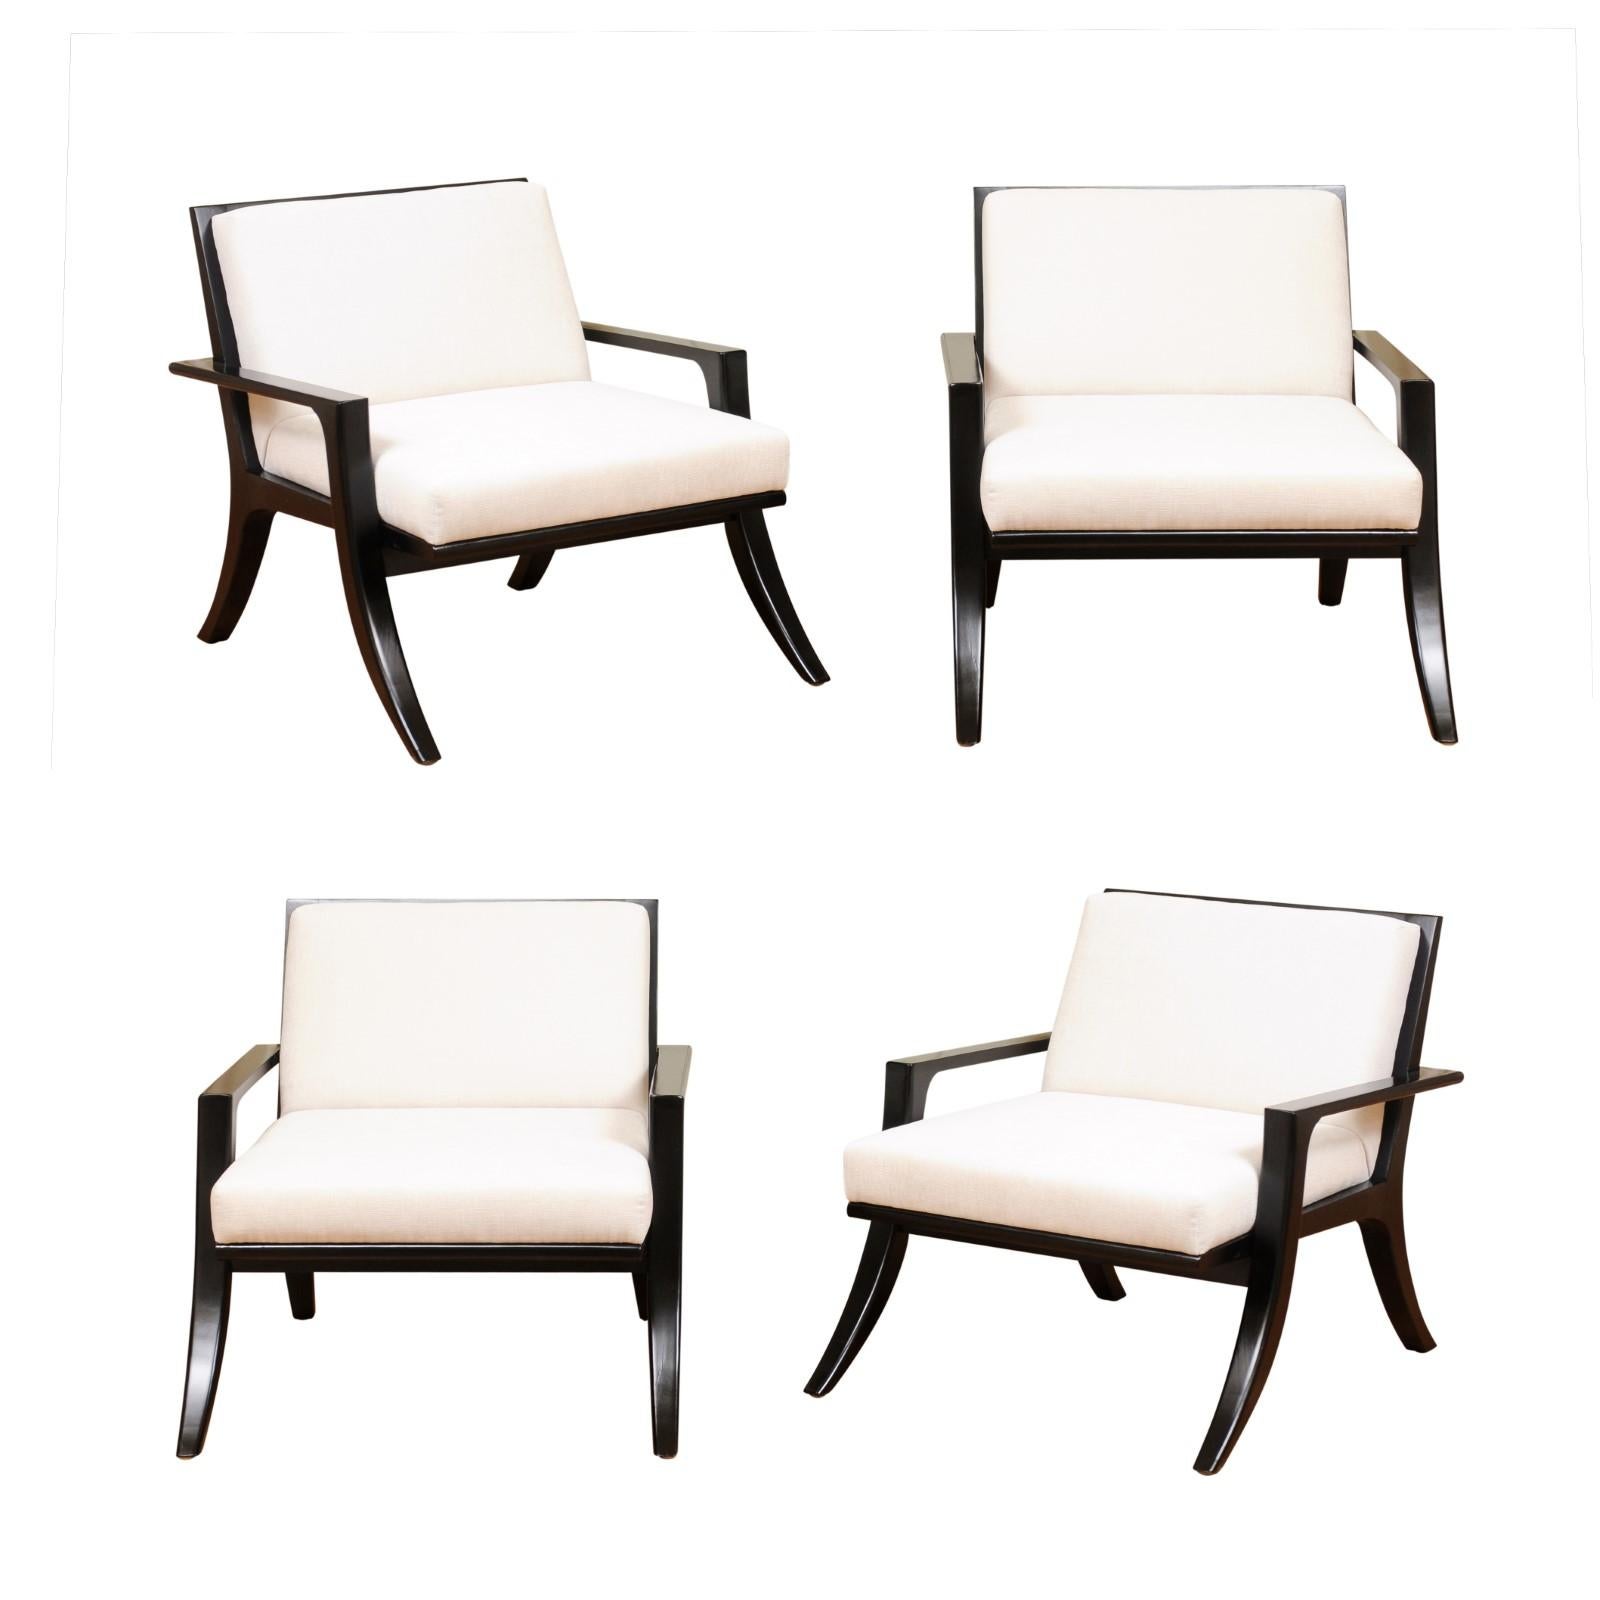 These magnificent lounge chairs are shipped as professionally photographed and described in the listing narrative: Meticulously professionally restored, expertly upholstered and installation ready. There are two (2) identical pairs available. The